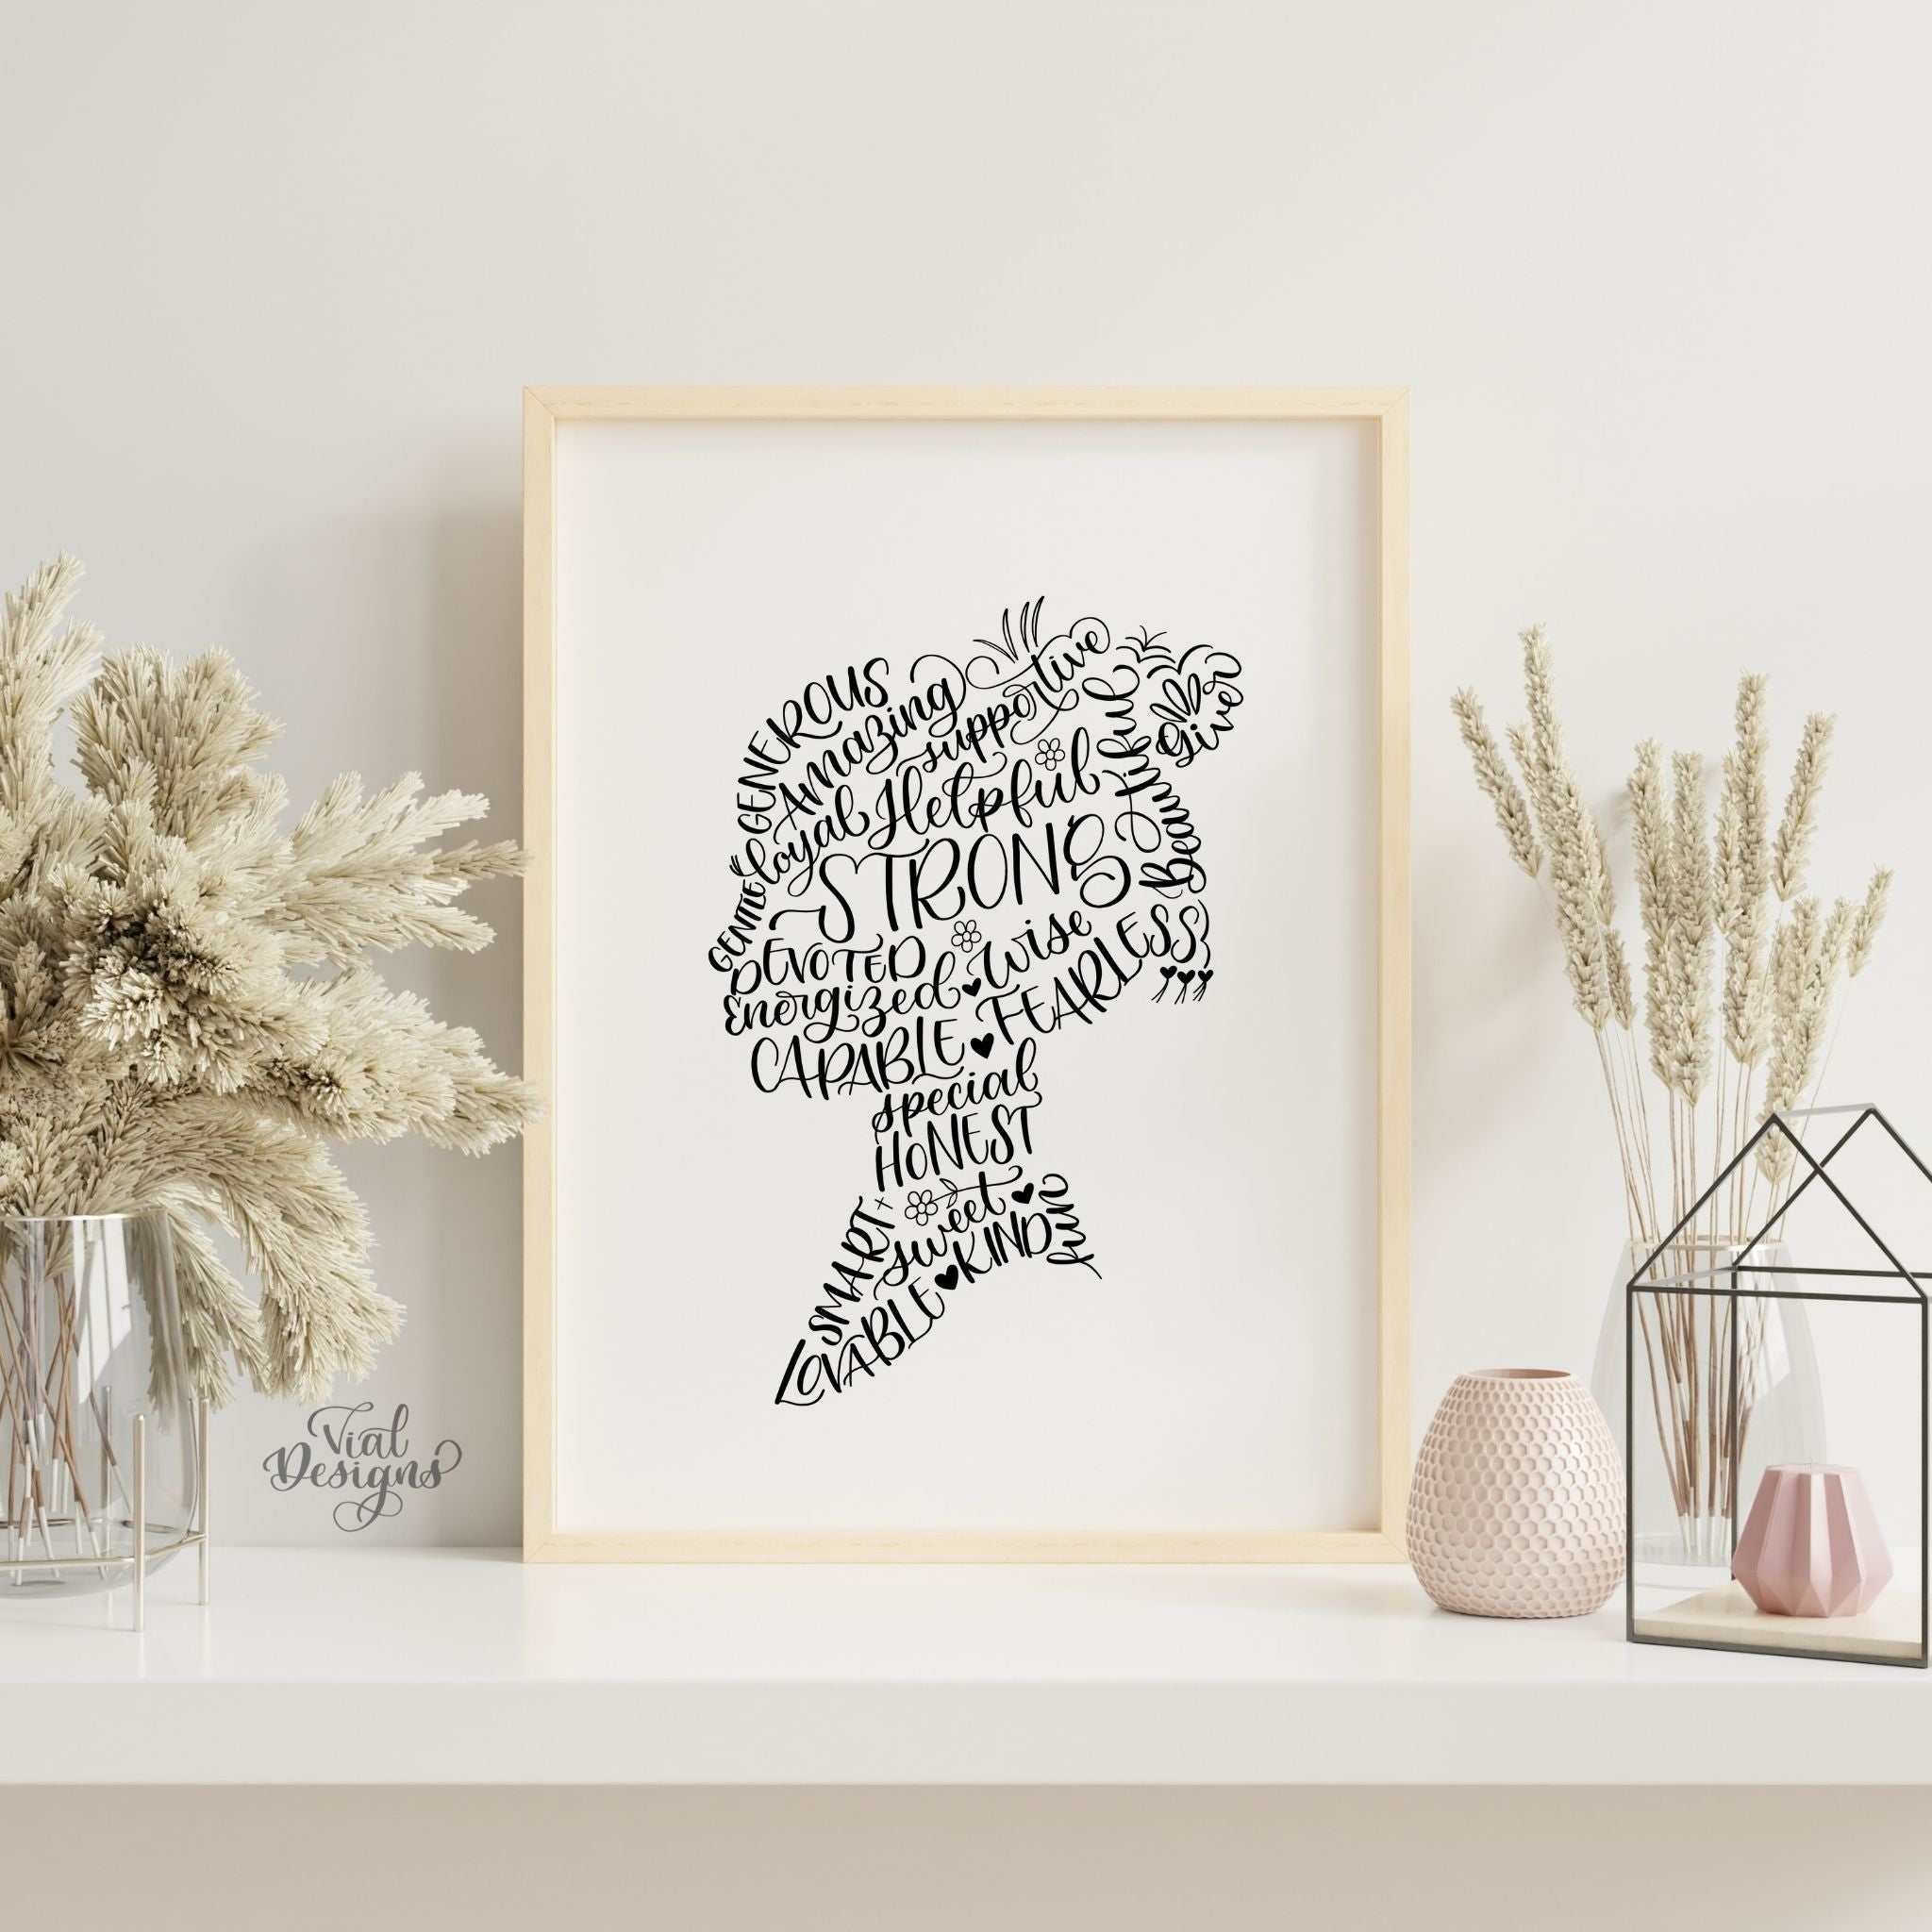 Calligraphy word collage printable with a woman silhouette framed